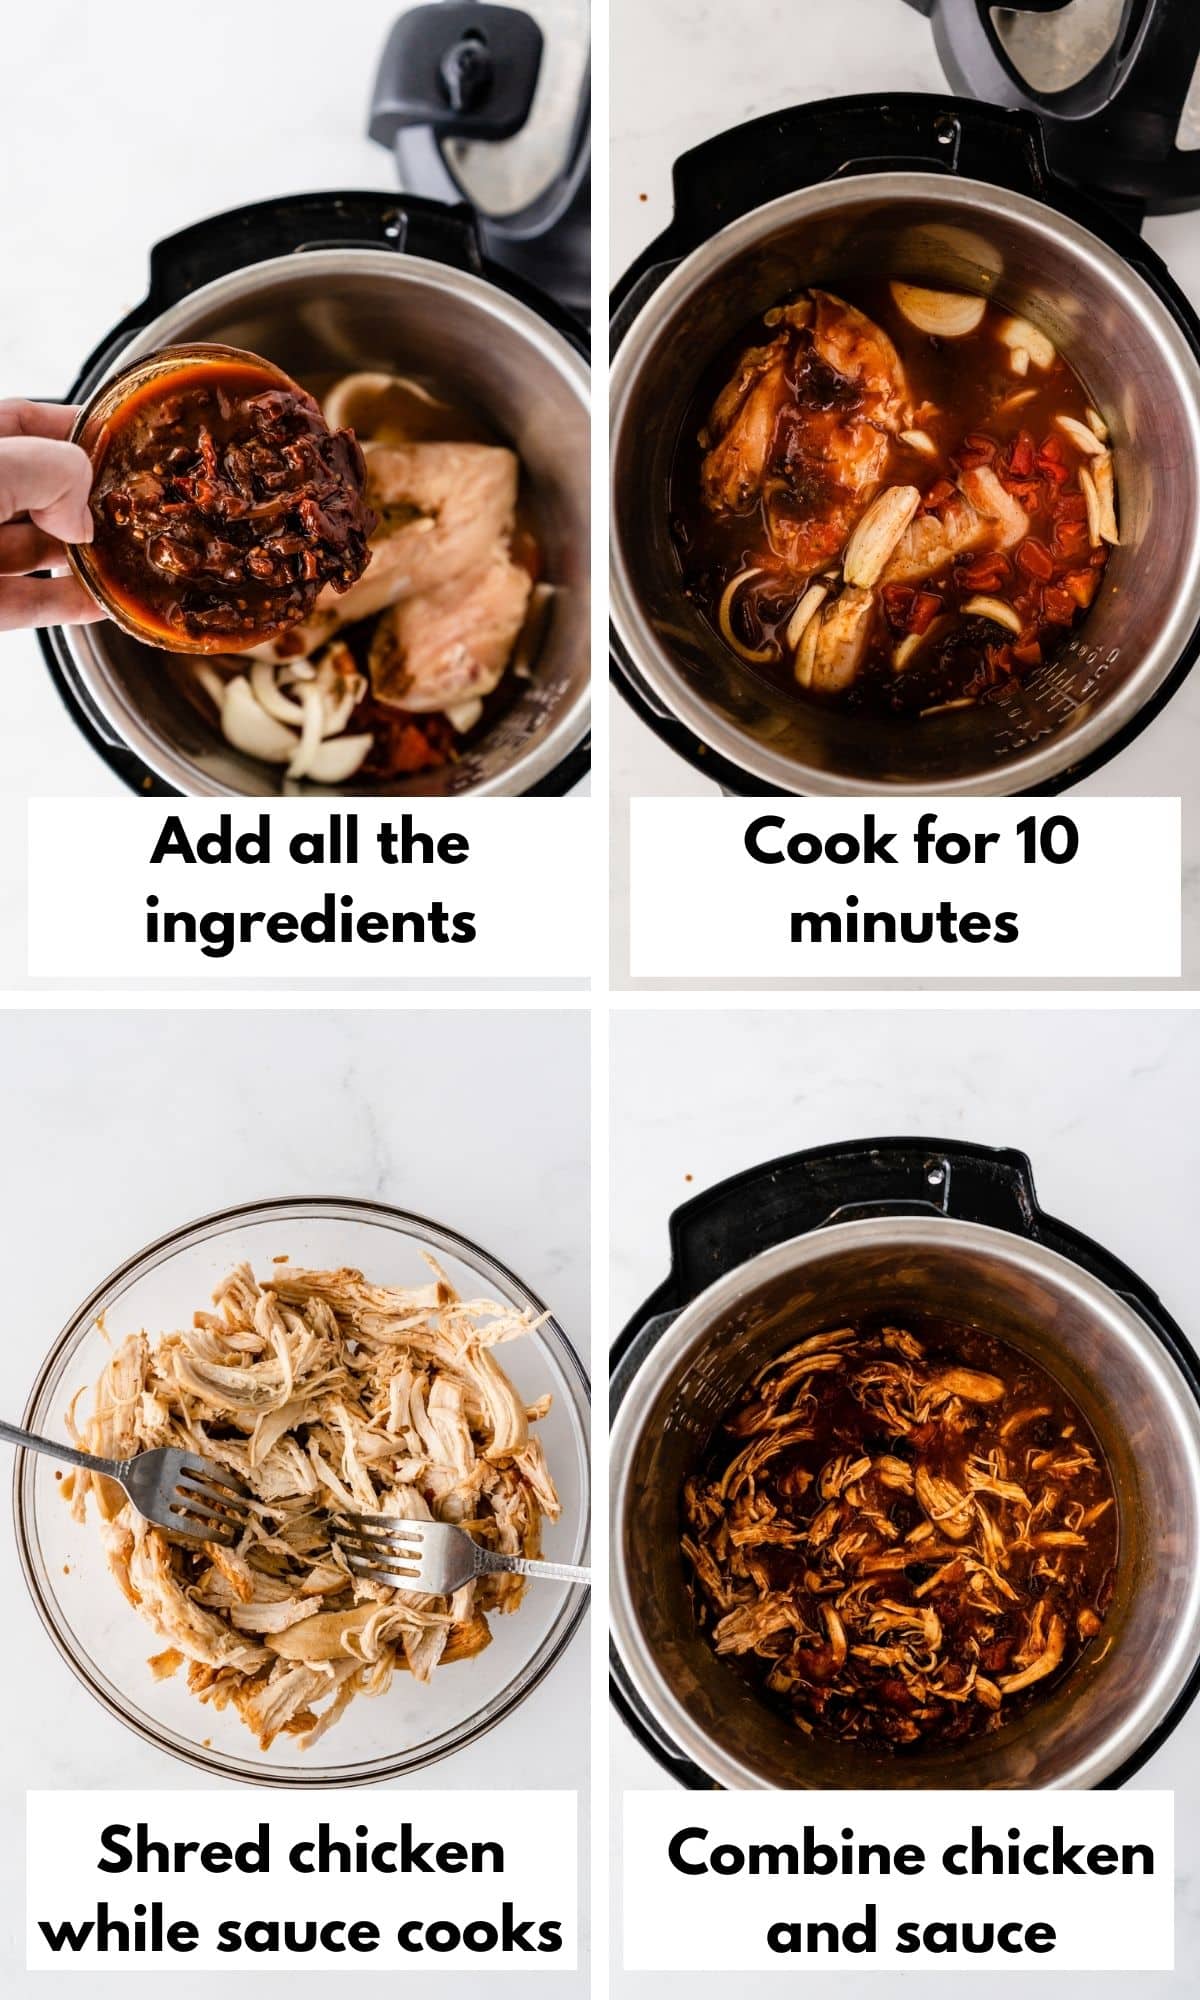 Pictures showing how to make the chicken tinga